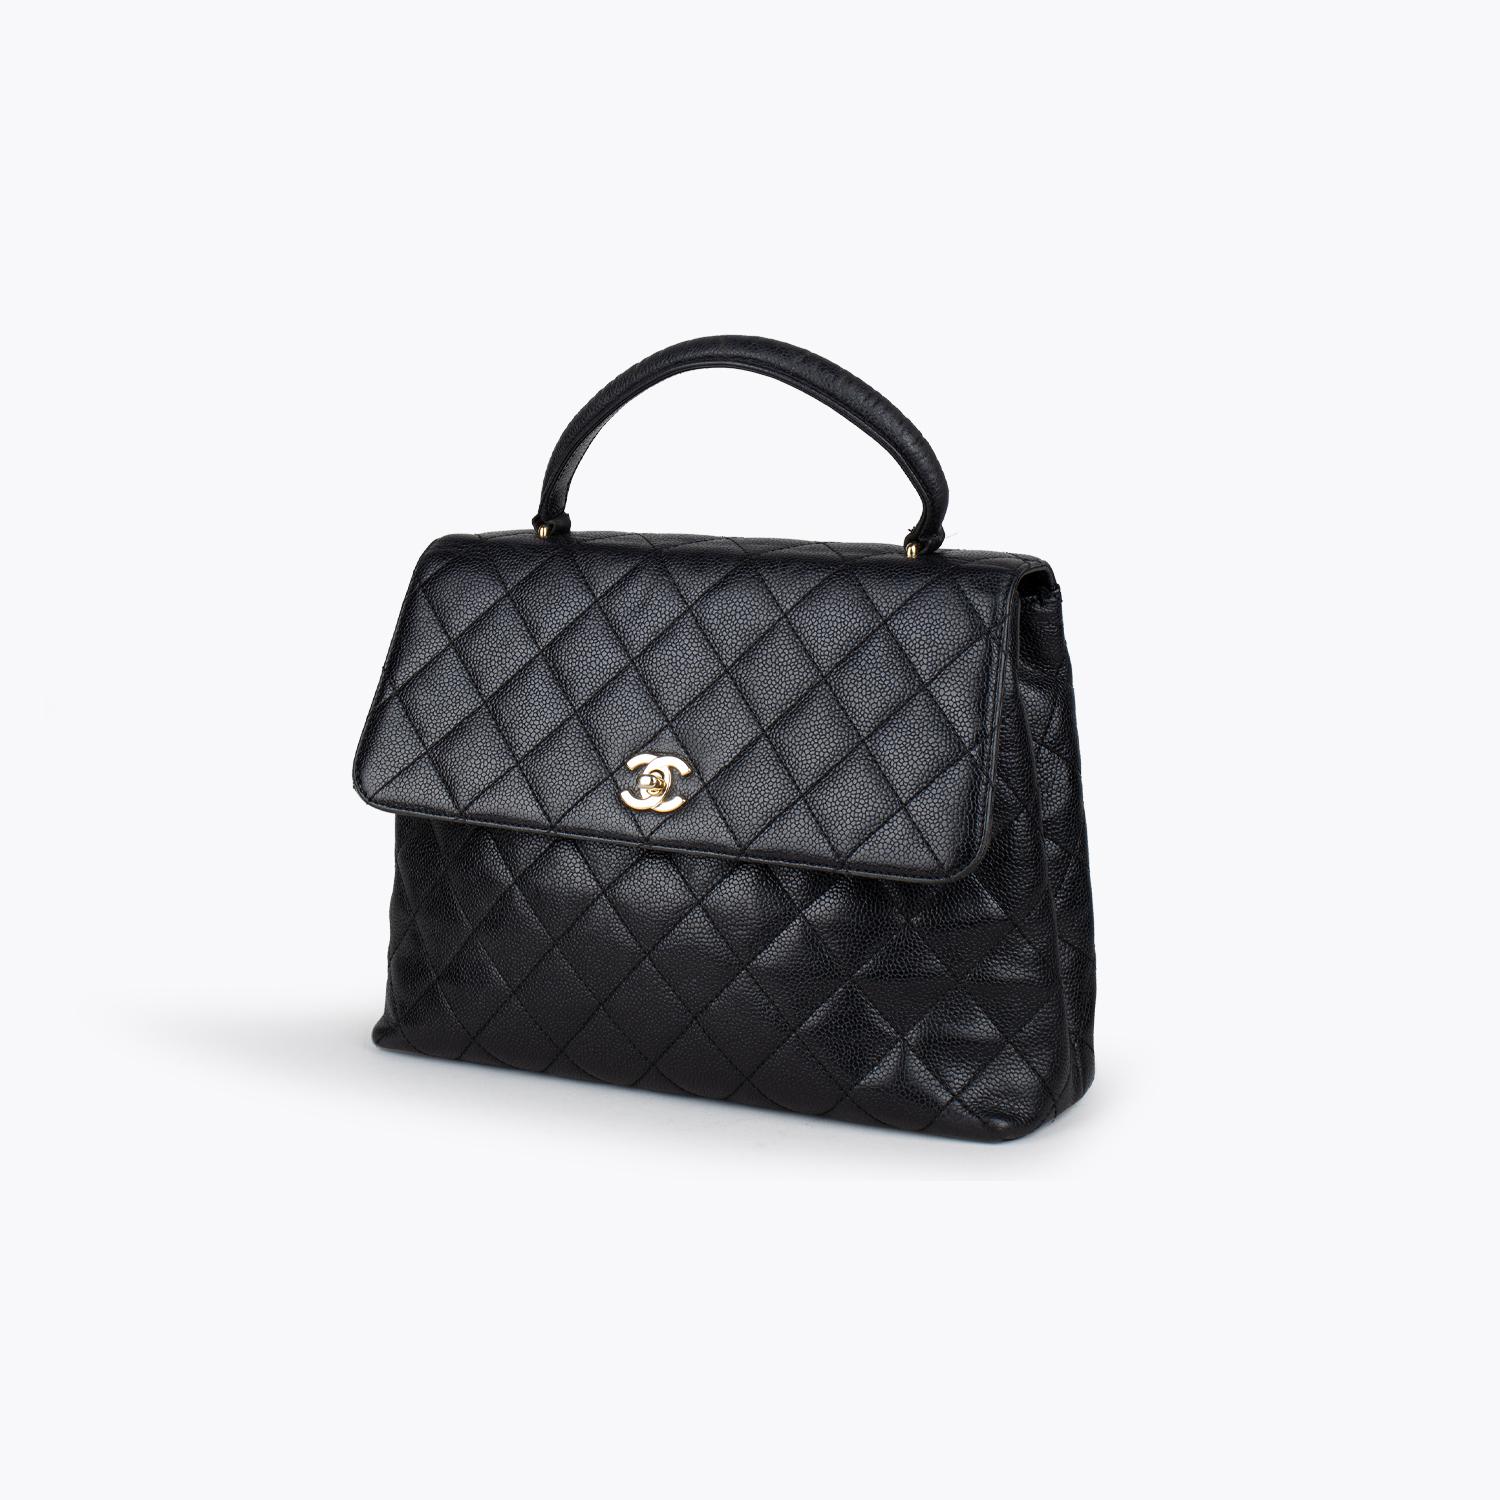 Black quilted caviar leather Chanel Kelly bag with

- Gold-tone hardware
- Single semi-rolled top handle
- Tonal leather lining
- Dual interior pockets; one with zip closure and signature CC turn-lock closure at front flap
- Dual interior